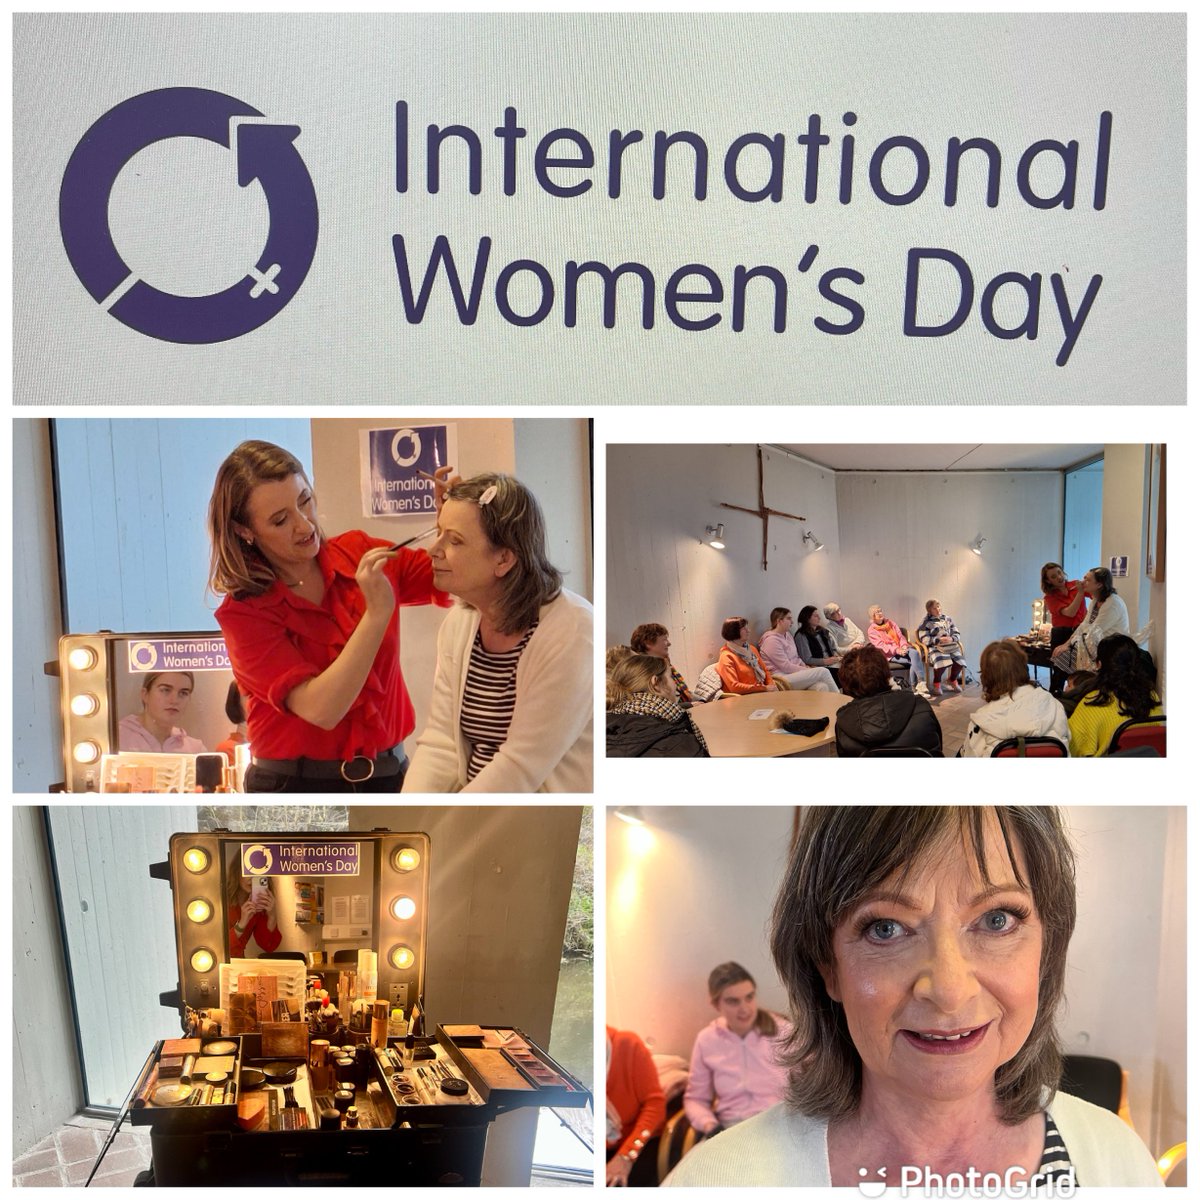 #bantrylibrary staff member Pamela Barry delivered a make up masterclass to an enthusiastic audience yesterday for International Women's Day!
#IWD2024 #InspireInclusion